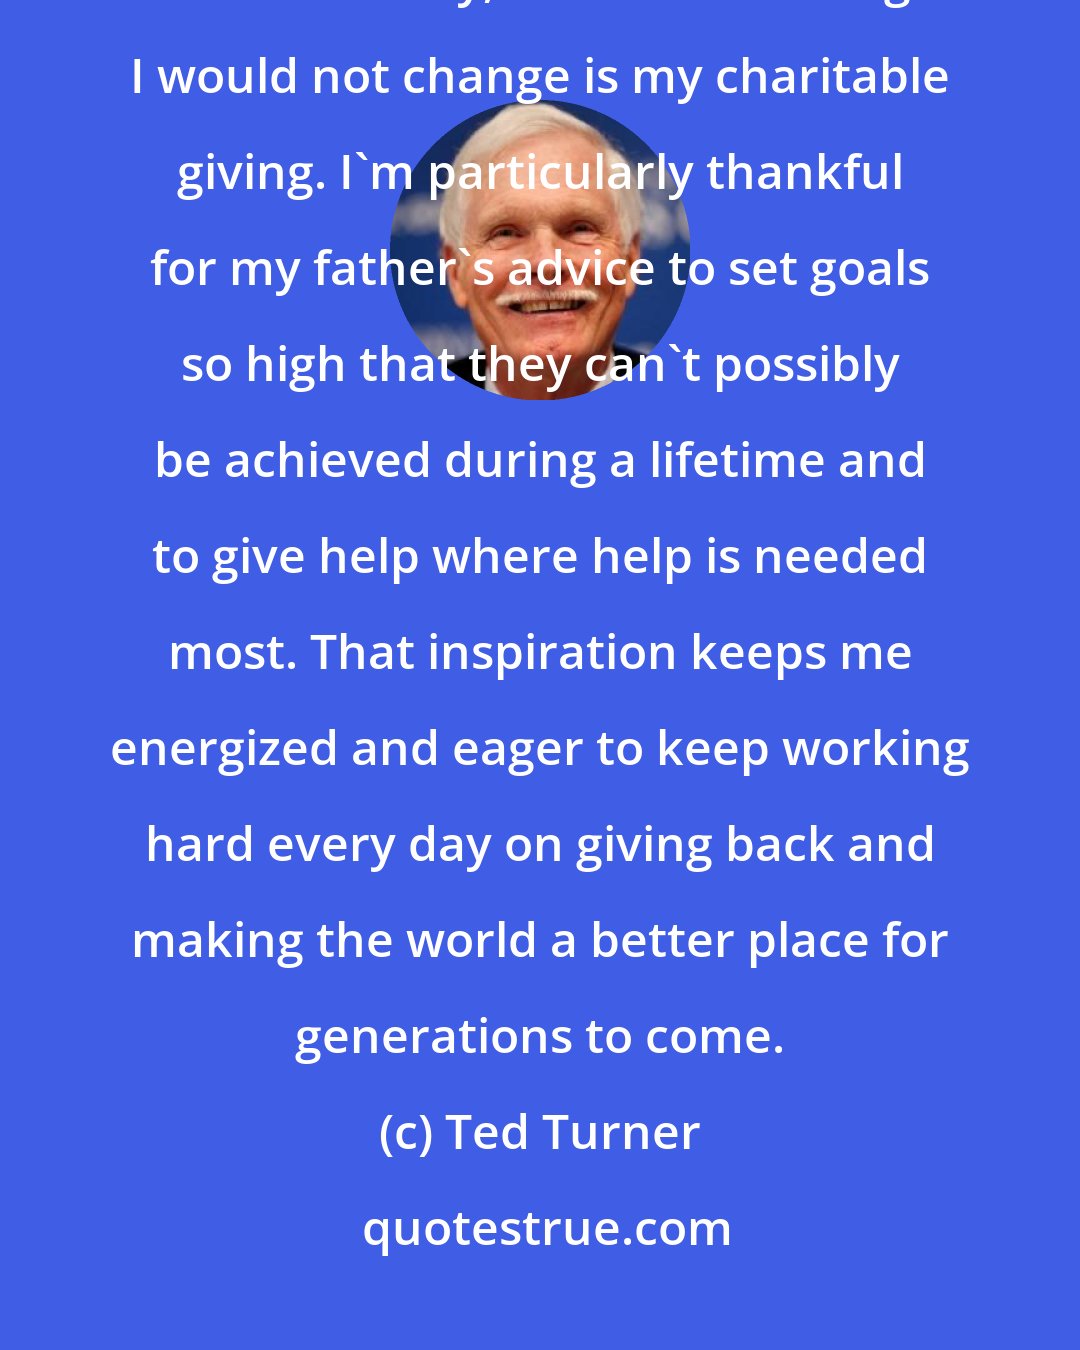 Ted Turner: Looking back, if I had to live my life over, there are things I would do differently, but the one thing I would not change is my charitable giving. I'm particularly thankful for my father's advice to set goals so high that they can't possibly be achieved during a lifetime and to give help where help is needed most. That inspiration keeps me energized and eager to keep working hard every day on giving back and making the world a better place for generations to come.